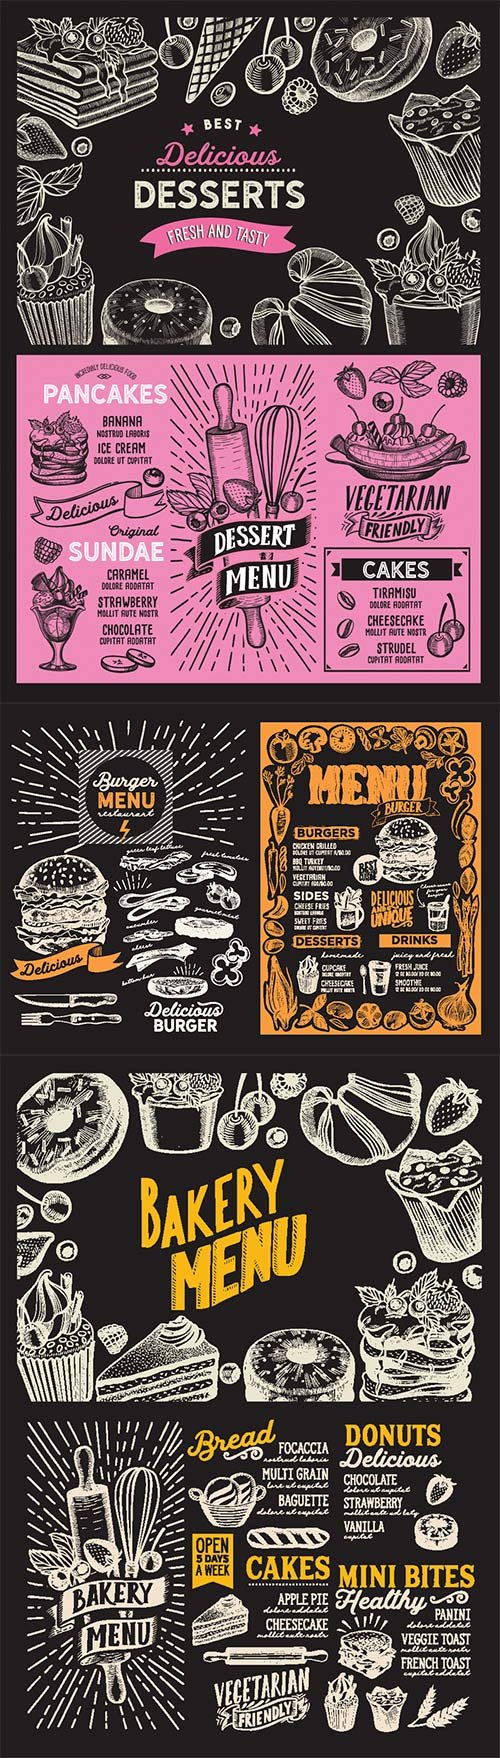 Menu food template for restaurant with doodle hand-drawn graphic